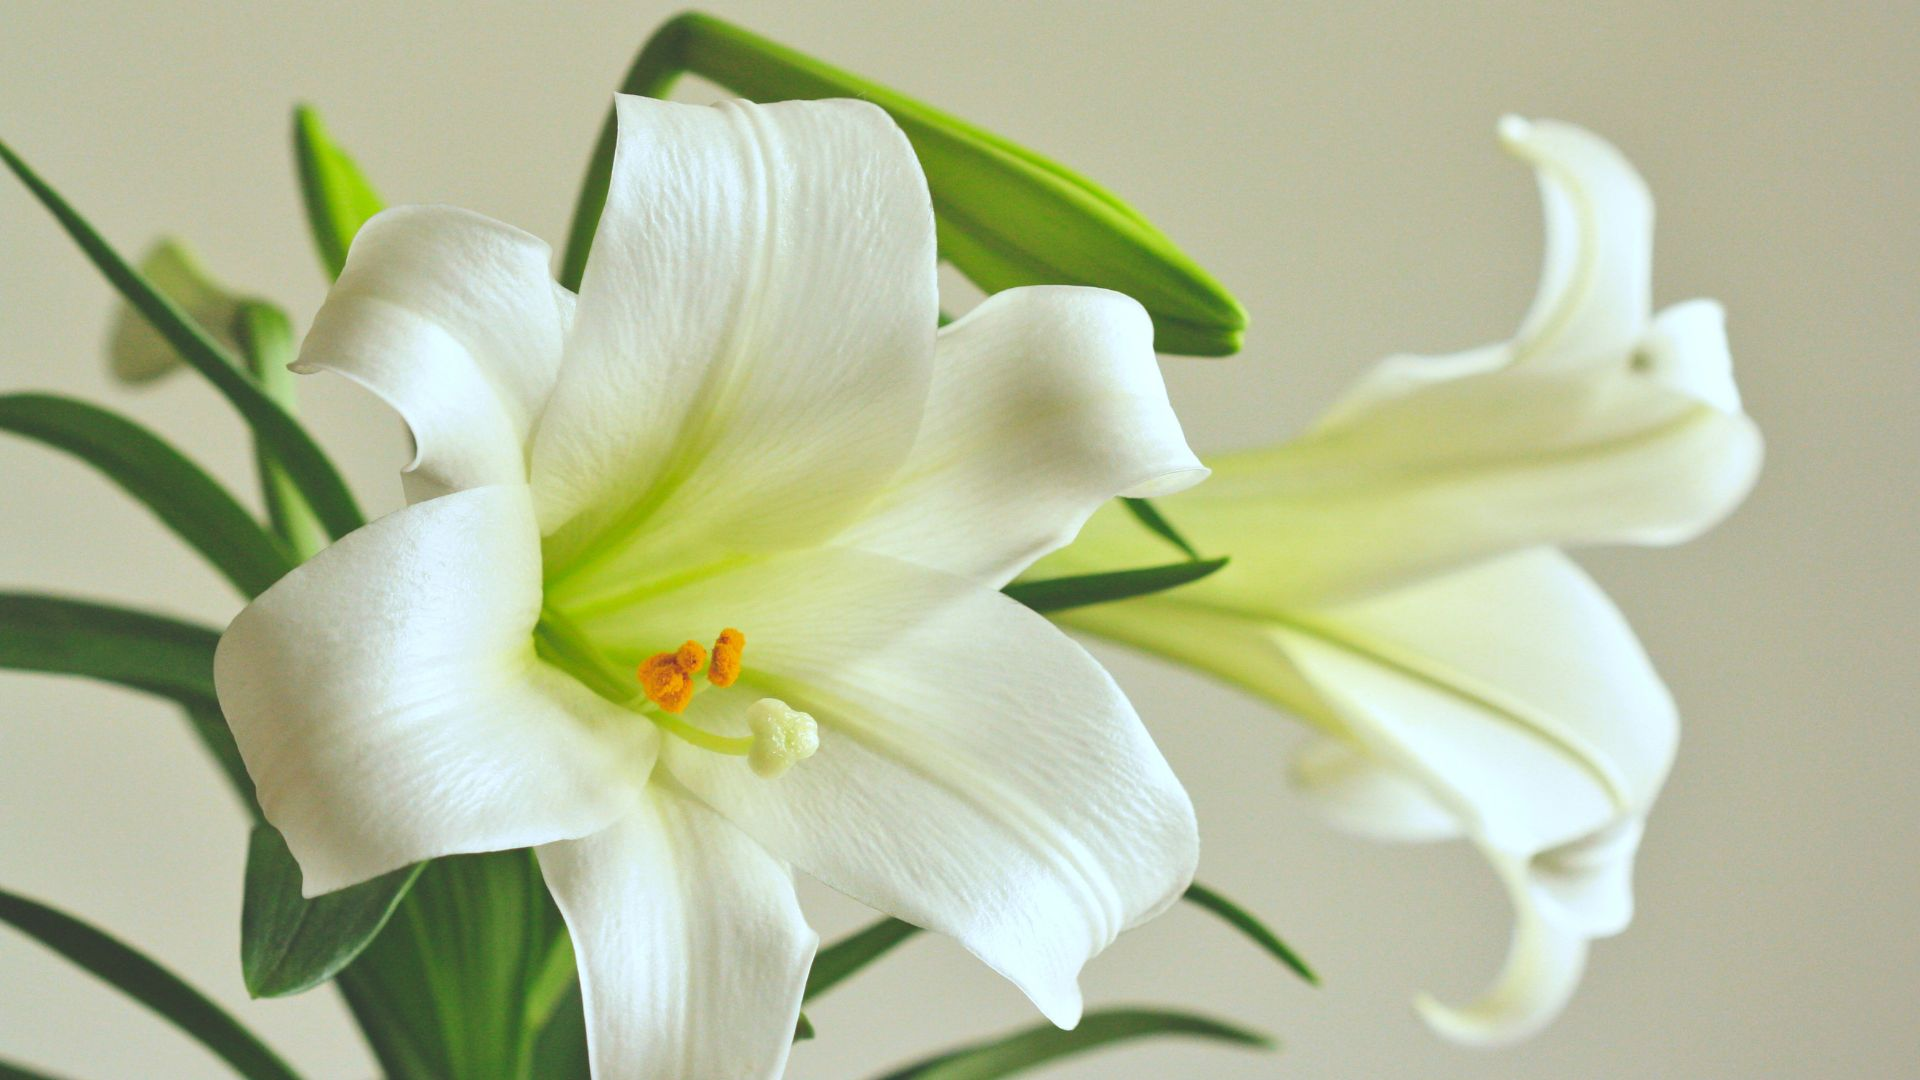 Sympathy and Funeral Services: Order Lilies to Express Condolences